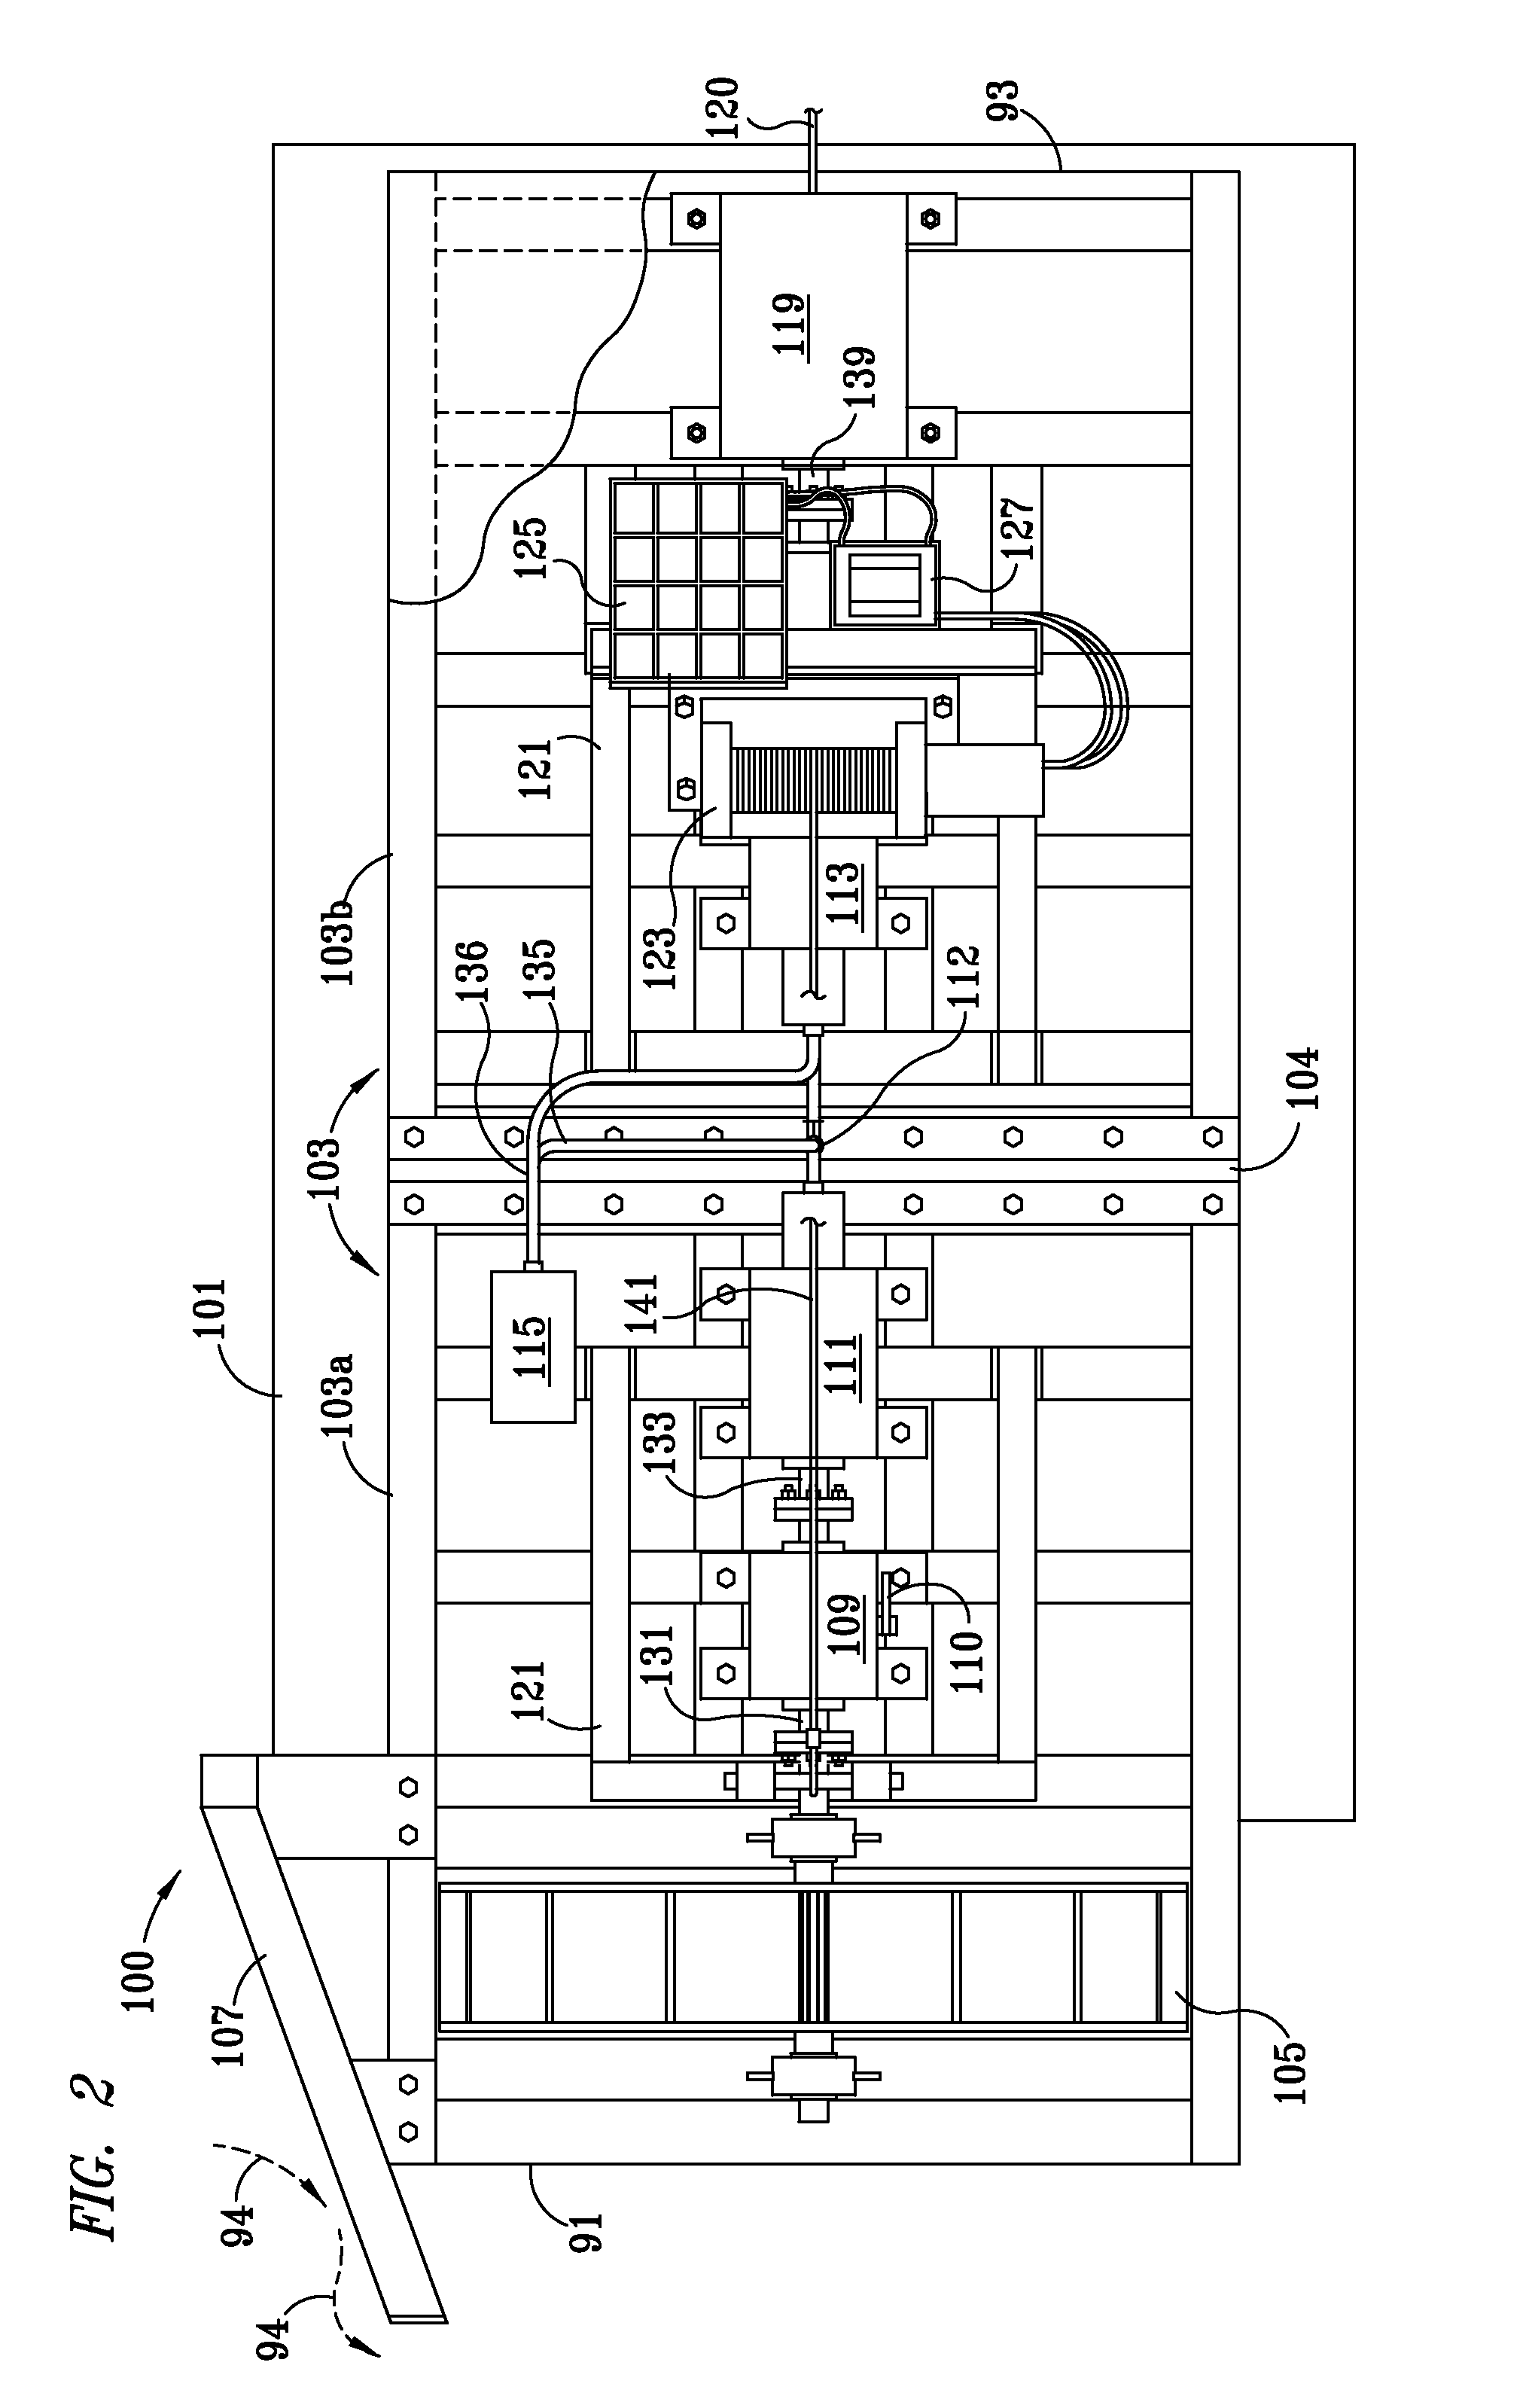 System and method for generating electricity